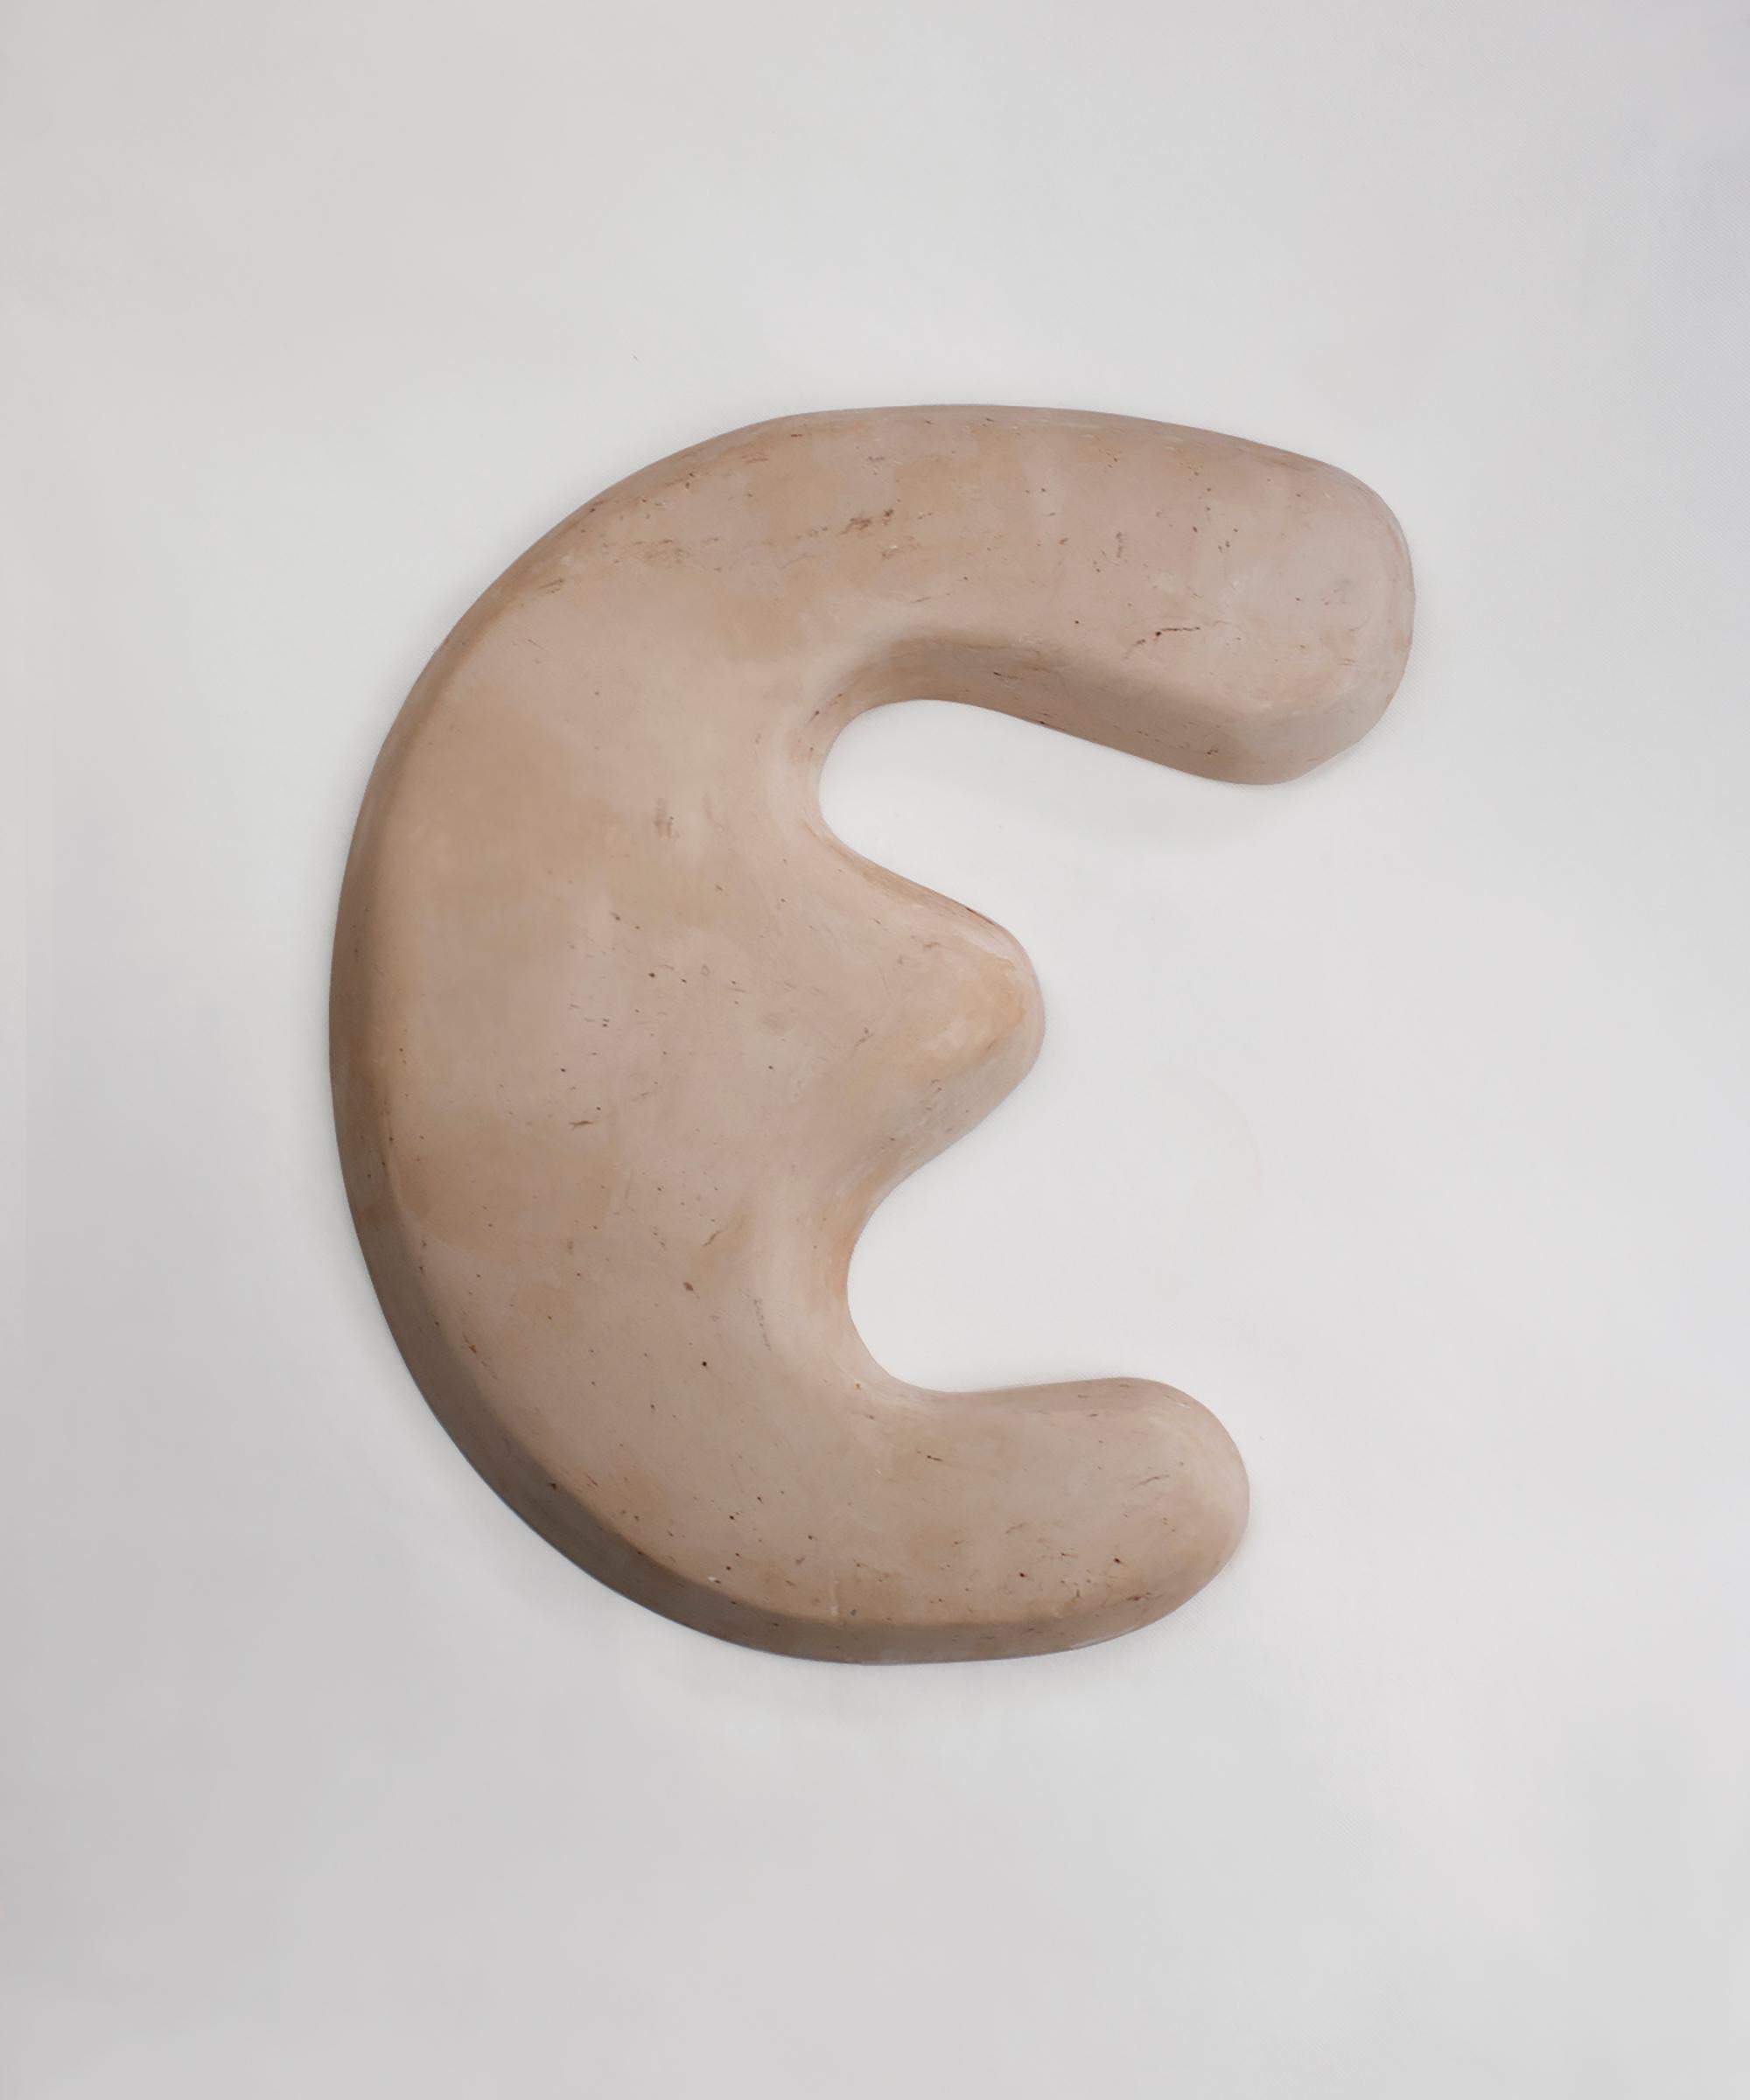 Sculpture form no_002 by AOAO
Dimensions: W 37 x D 4 x H 47 cm
Materials: plaster
Color options available upon request.

The idea was born after deciding to reconnect with my family and my grandfather – a sculptor artist. Learning to sculpt and